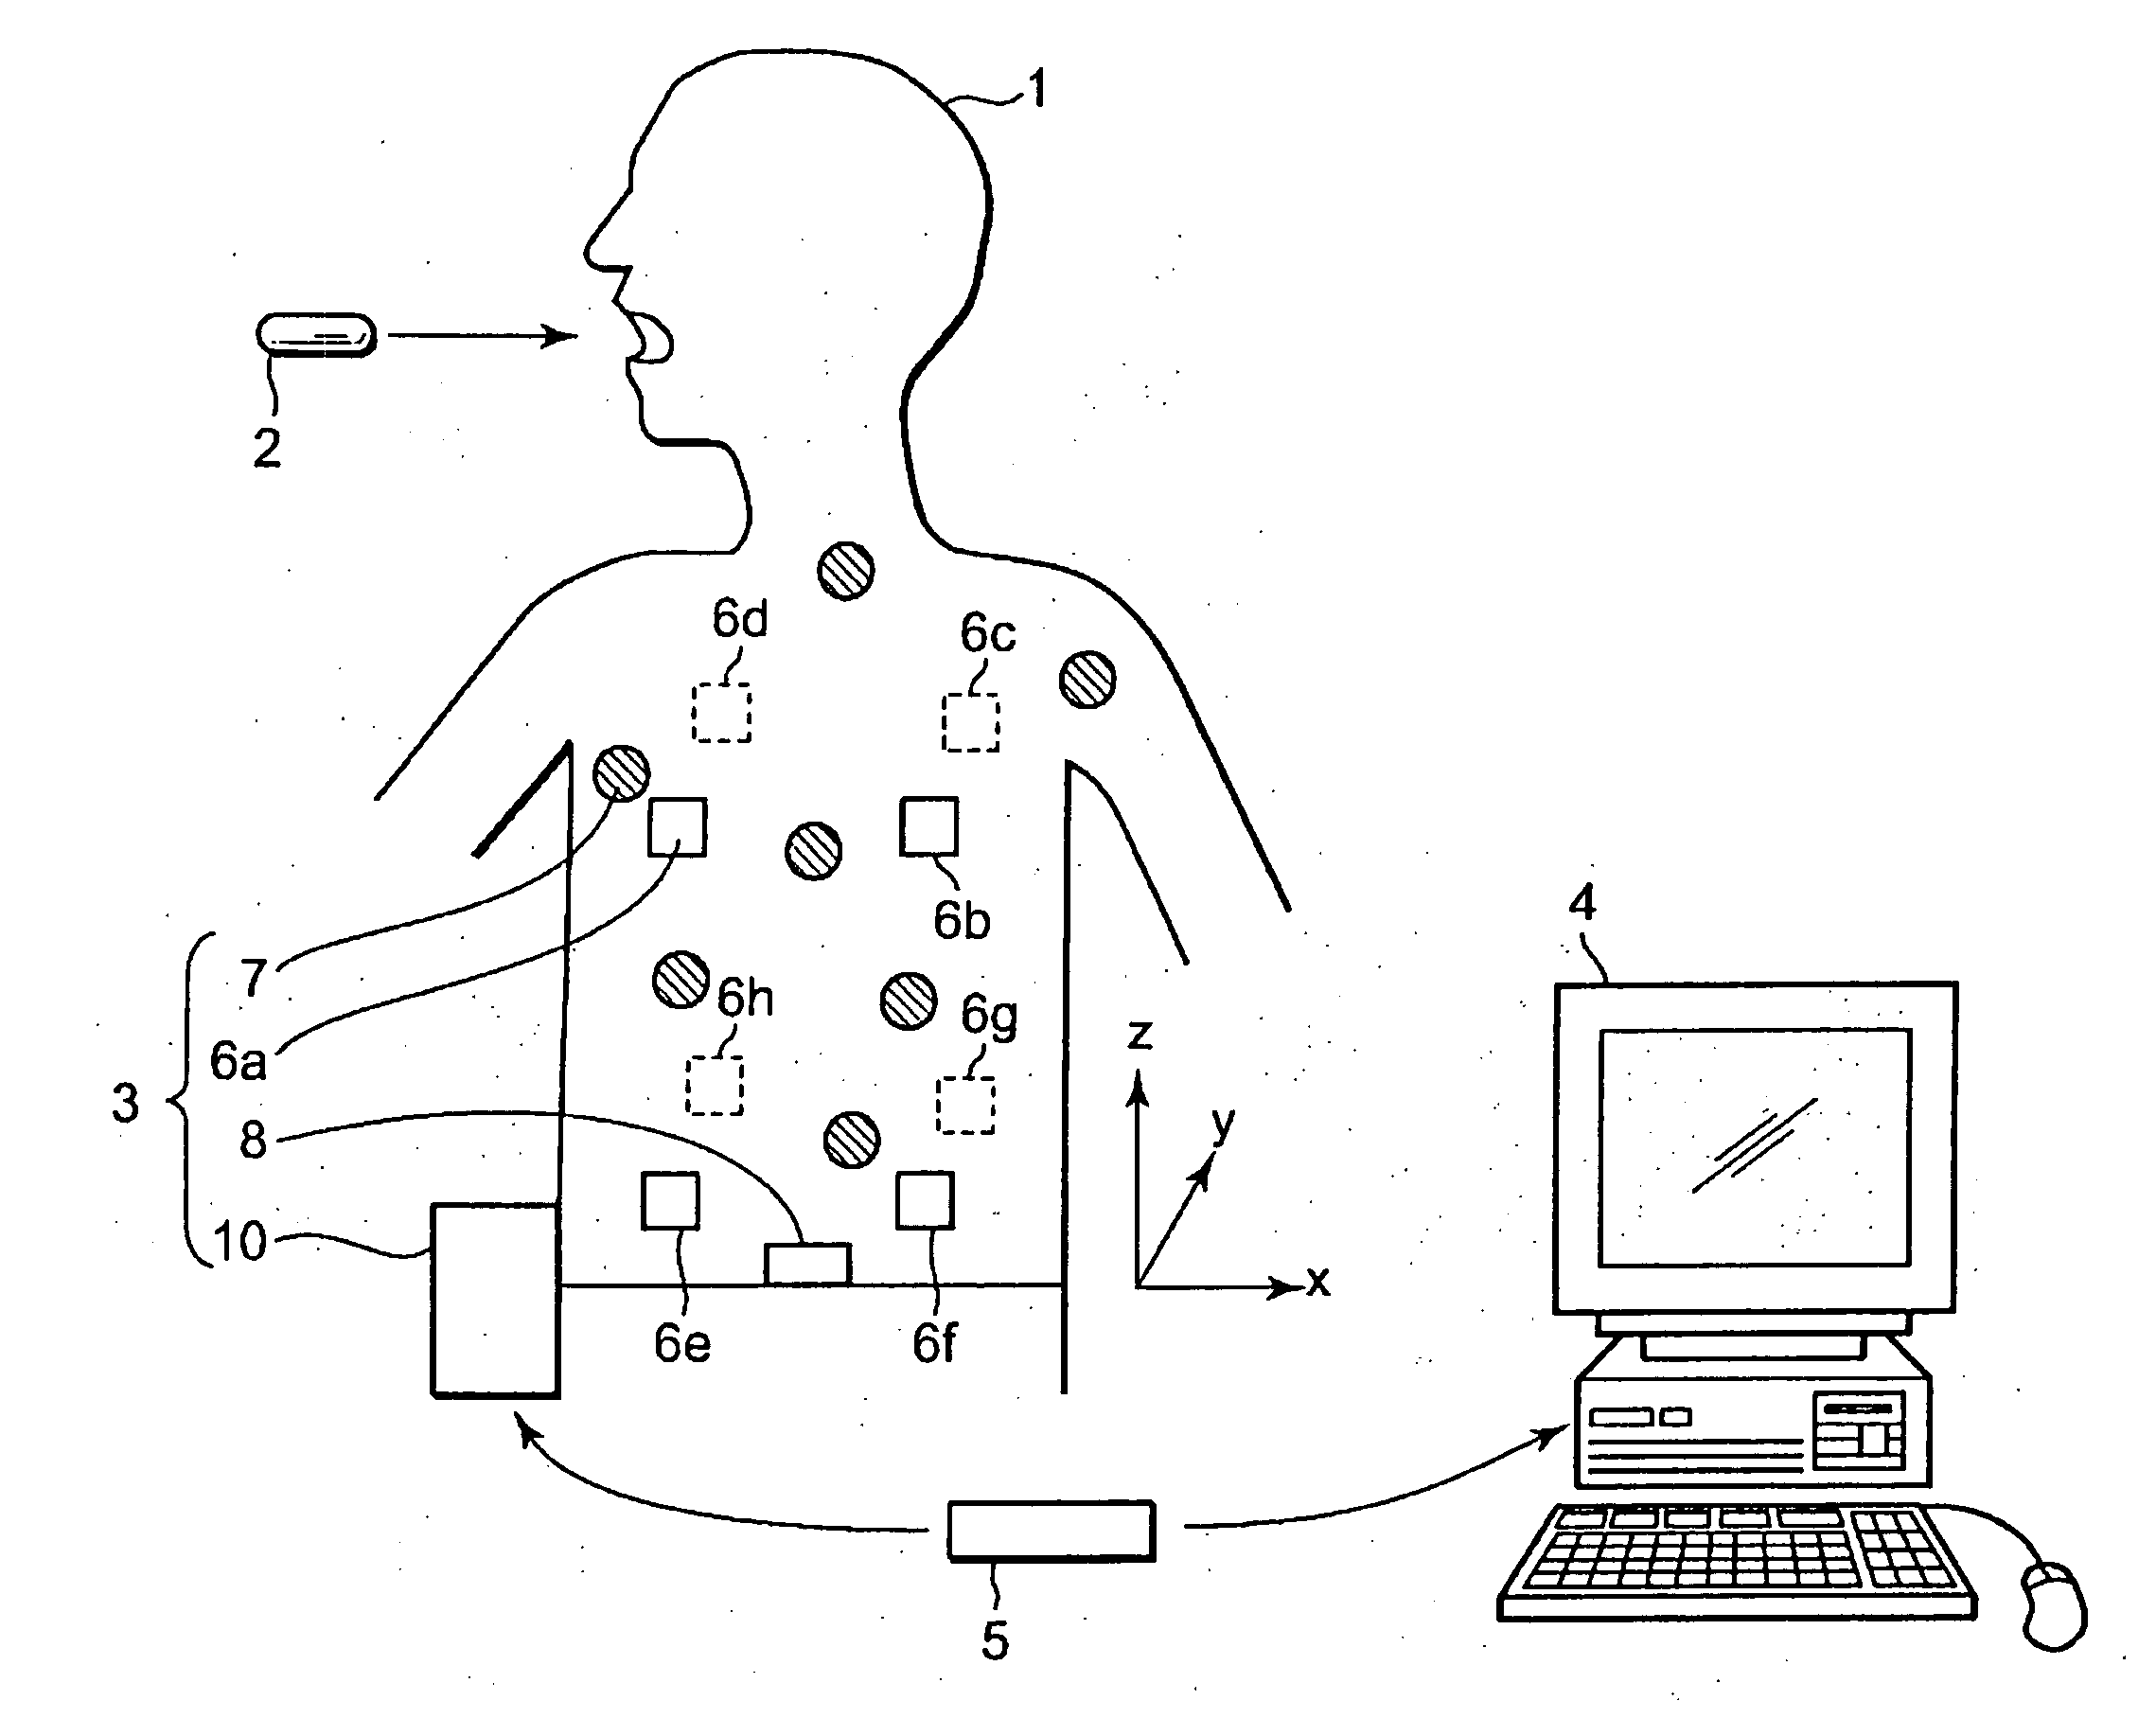 Intra-subject position display system